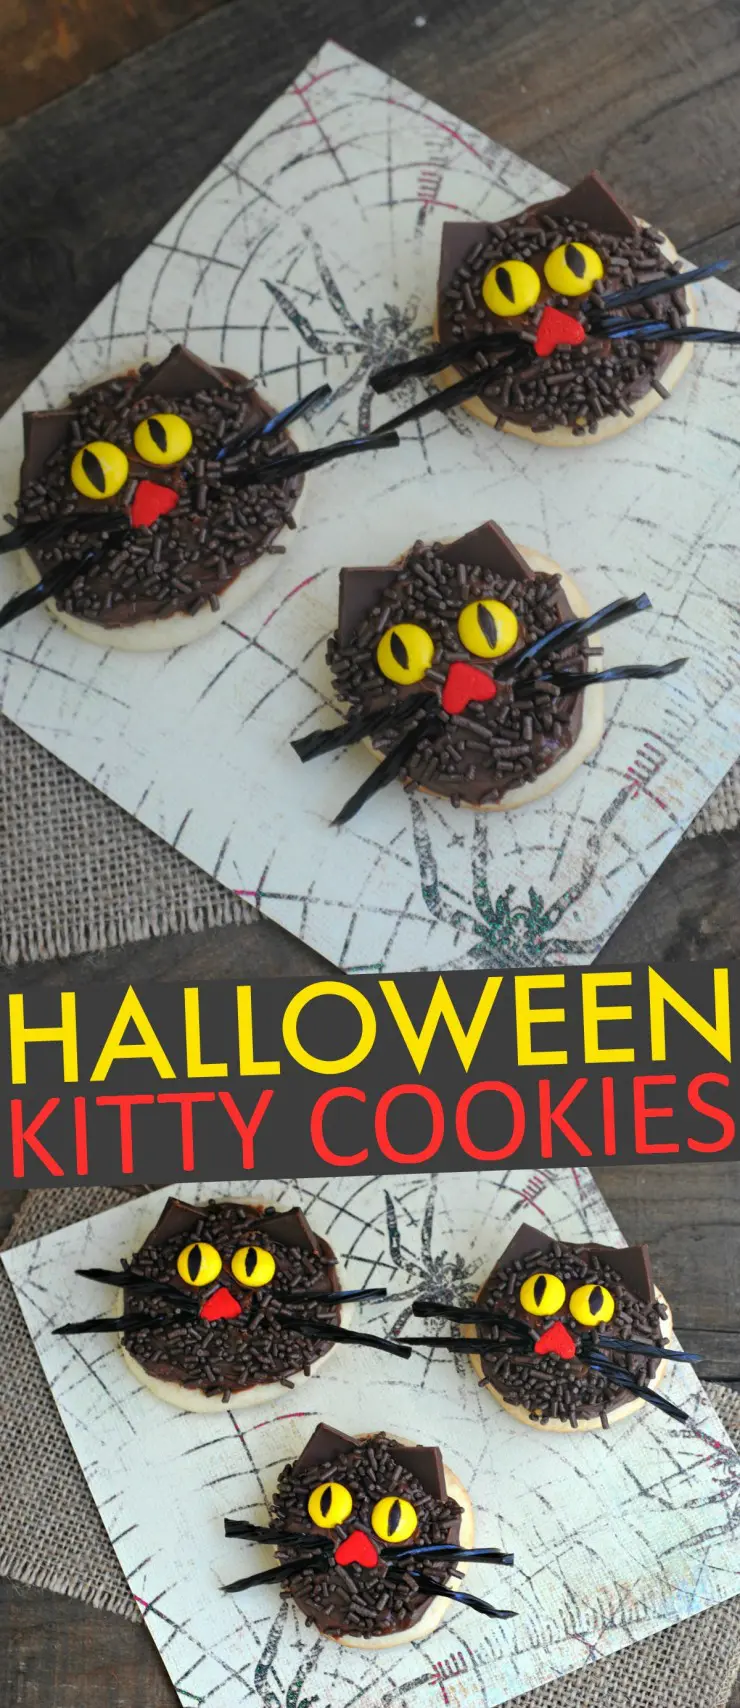 These Halloween Kitty Cookies are a Spooky feline treat perfect for kids Halloween parties!